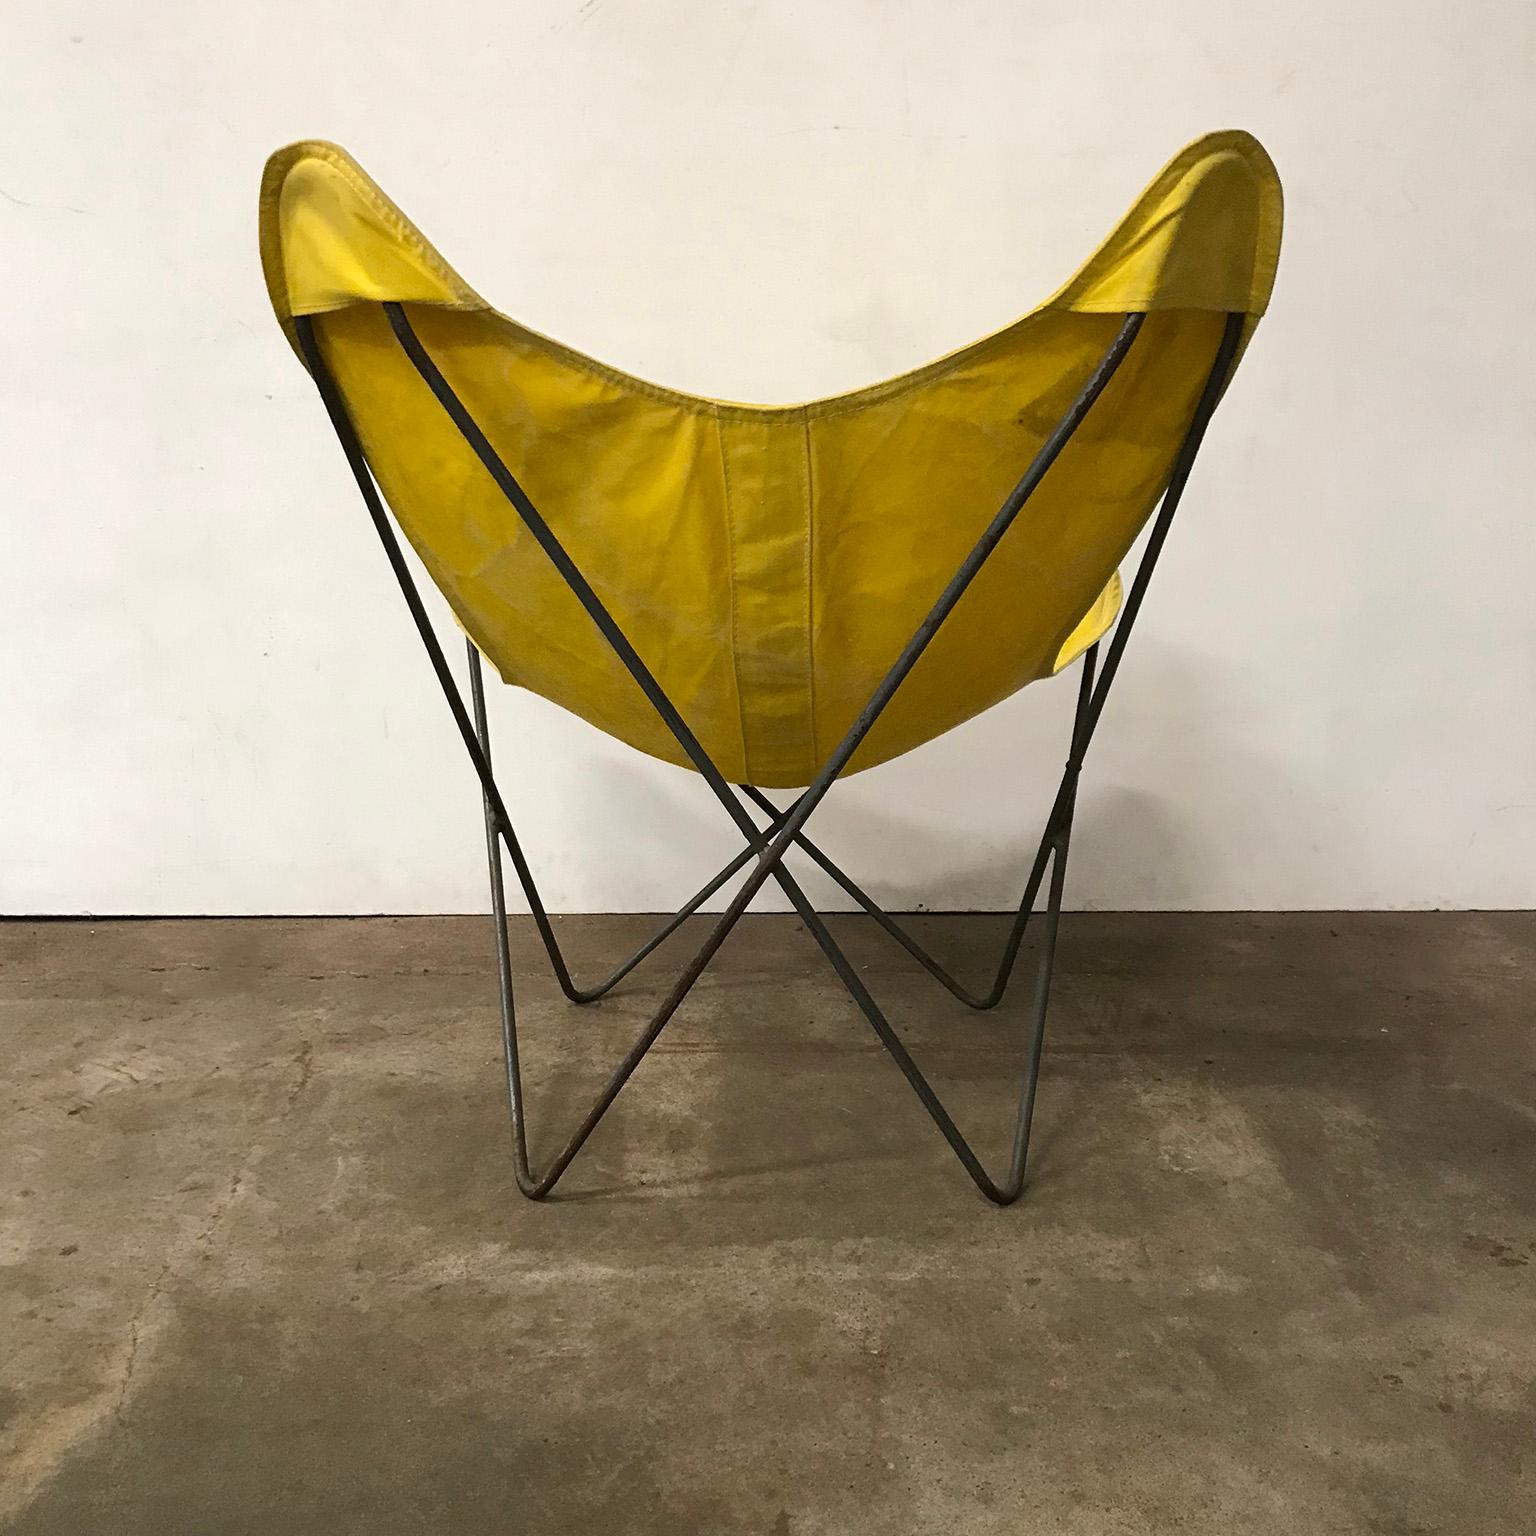 American 1947, Hardoy, Ferrari, Yellow Cover with Black Base Butterfly Chair